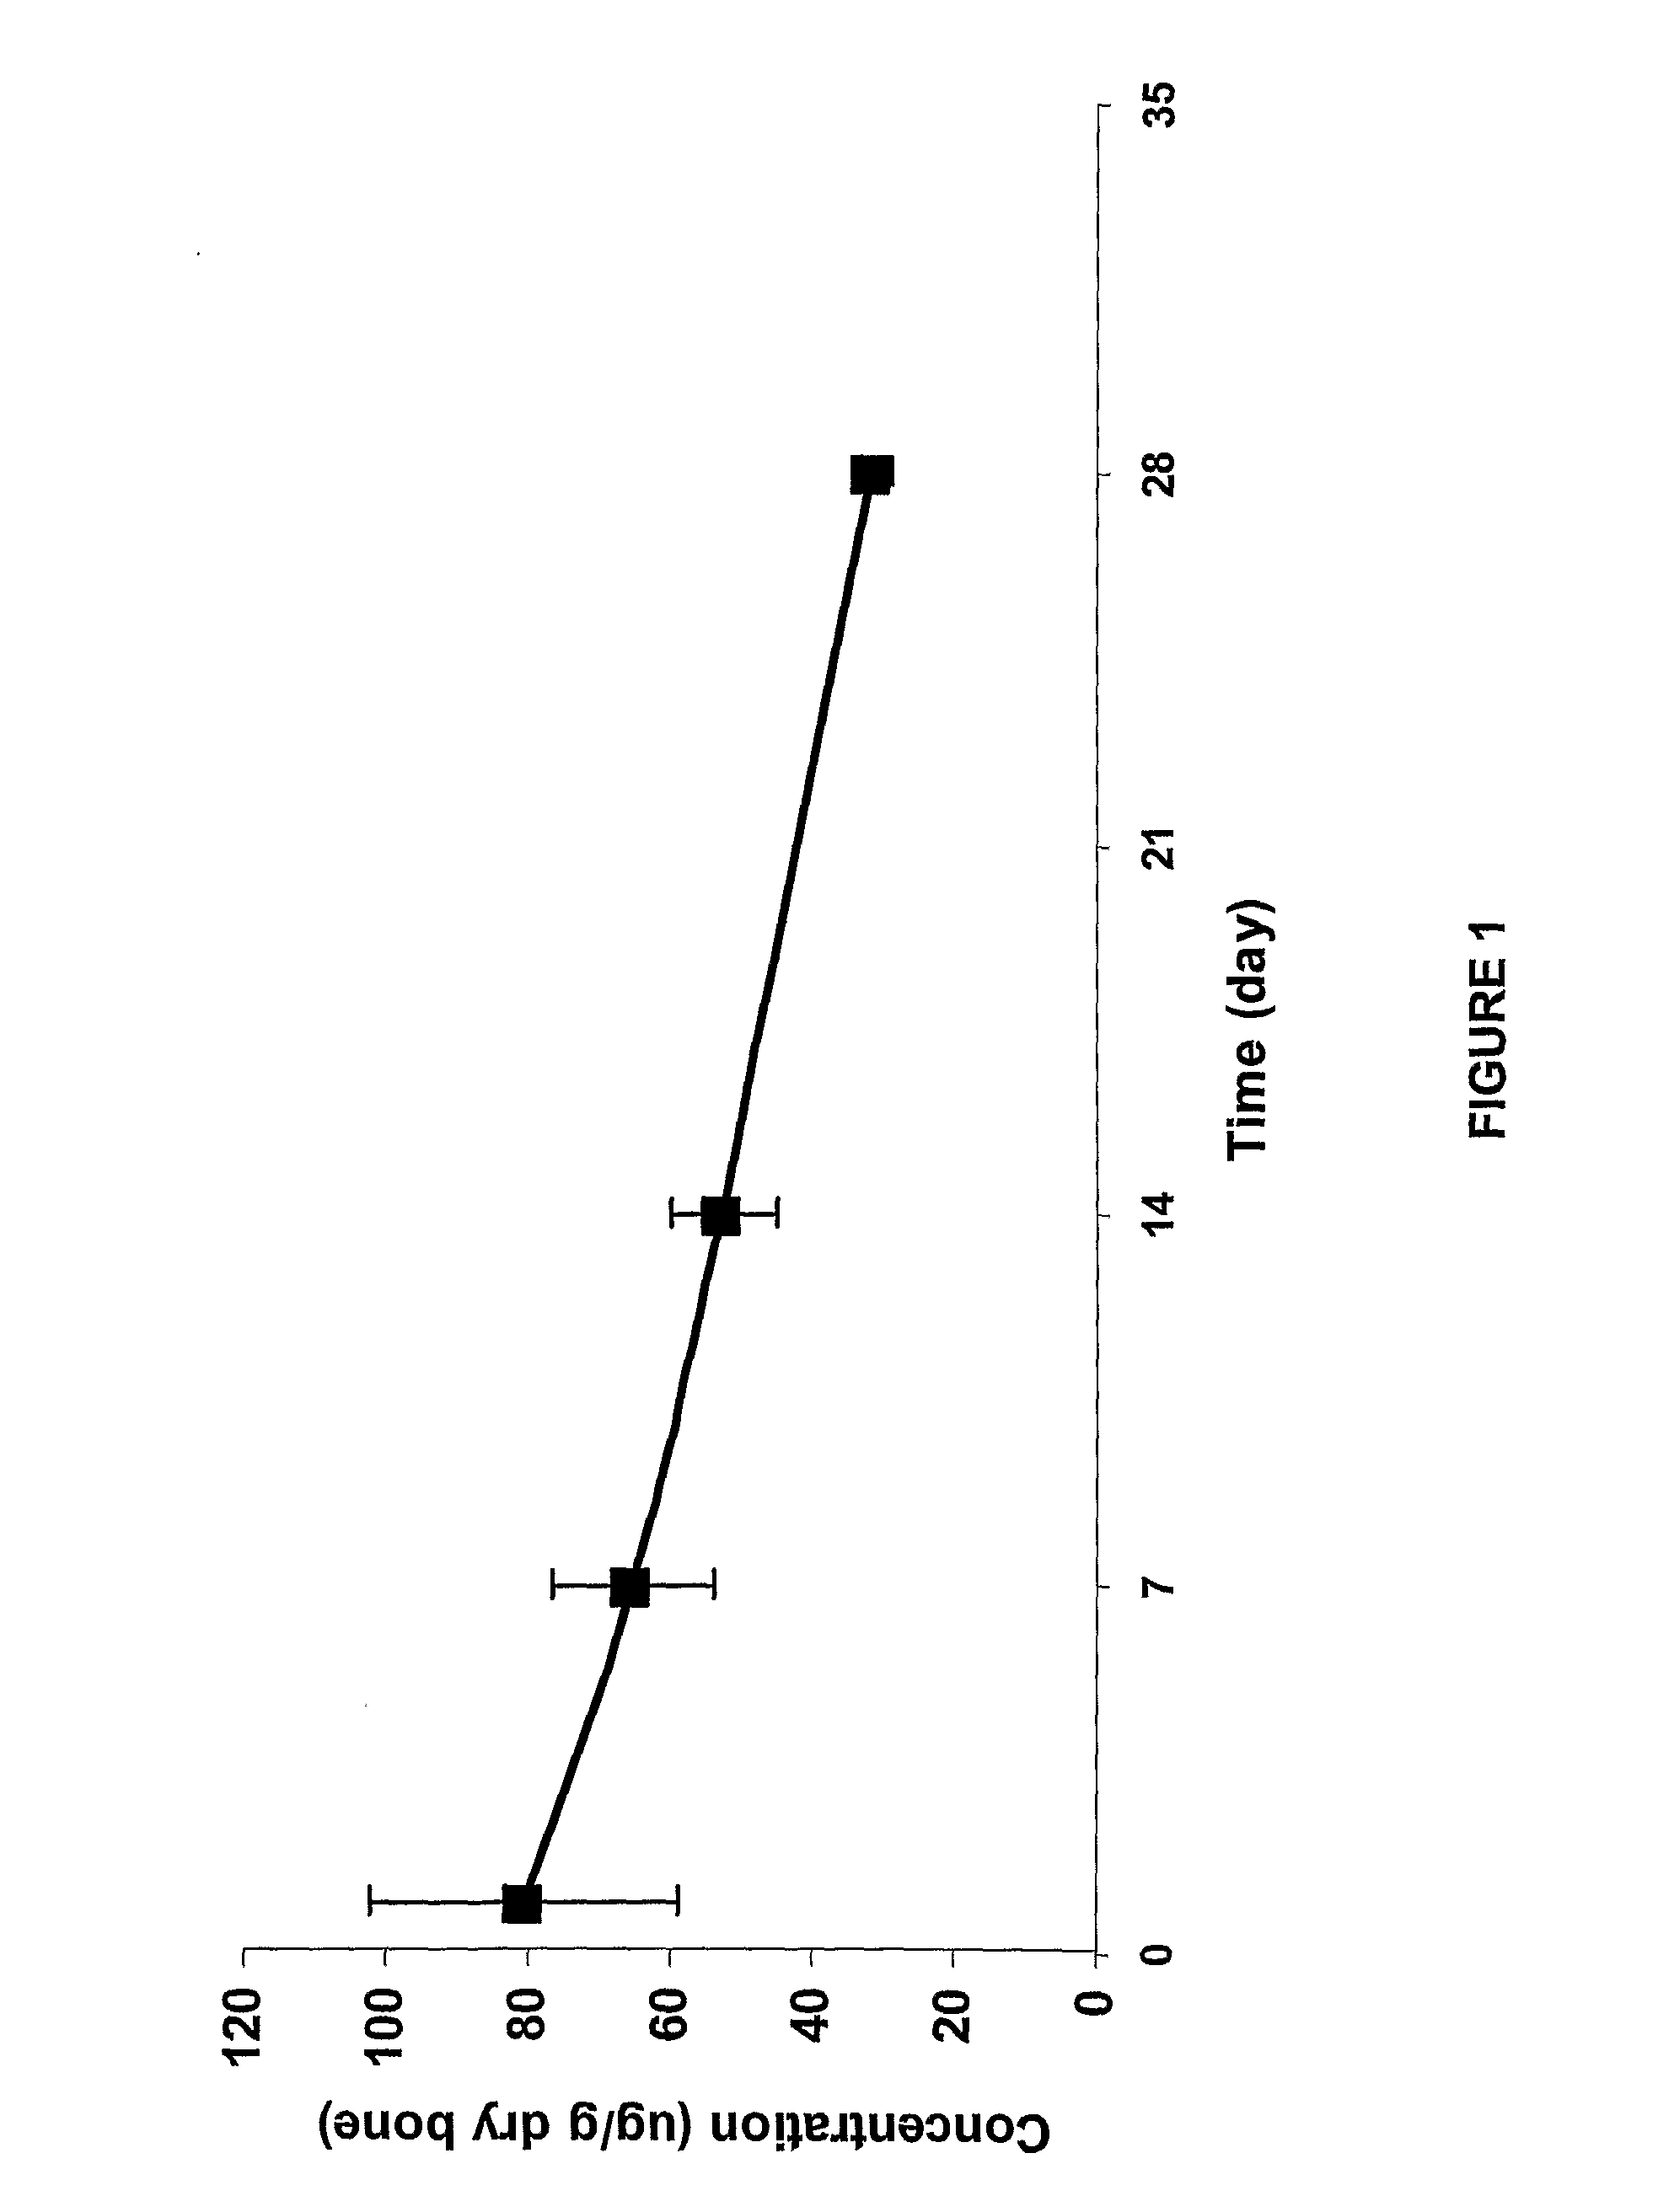 Phosphonated Fluoroquinolones, Antibacterial Analogs Thereof, and Methods for the Prevention and Treatment of Bone and Joint Infections